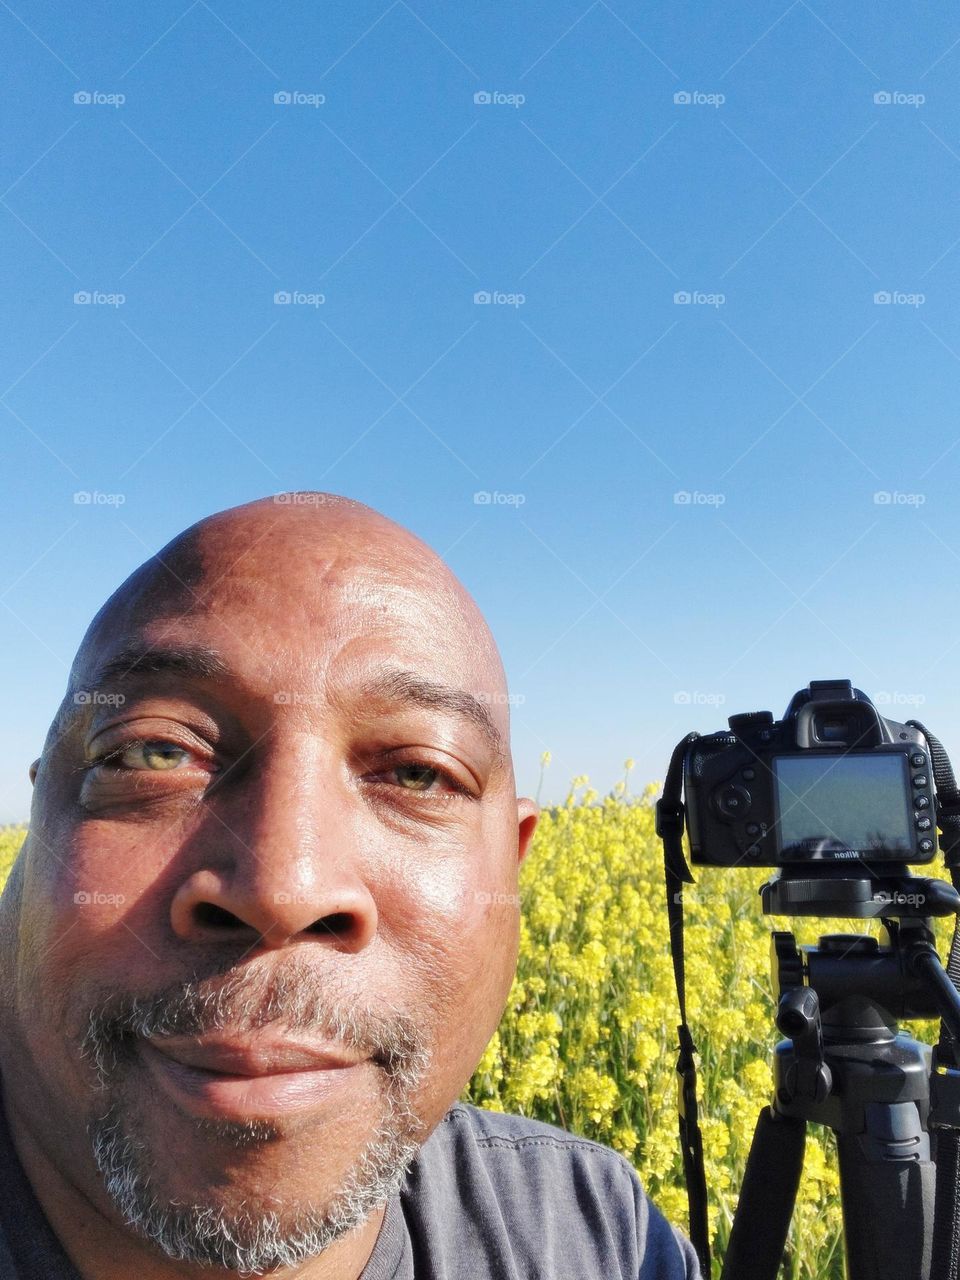 photographer enjoying nature in a field of flowers